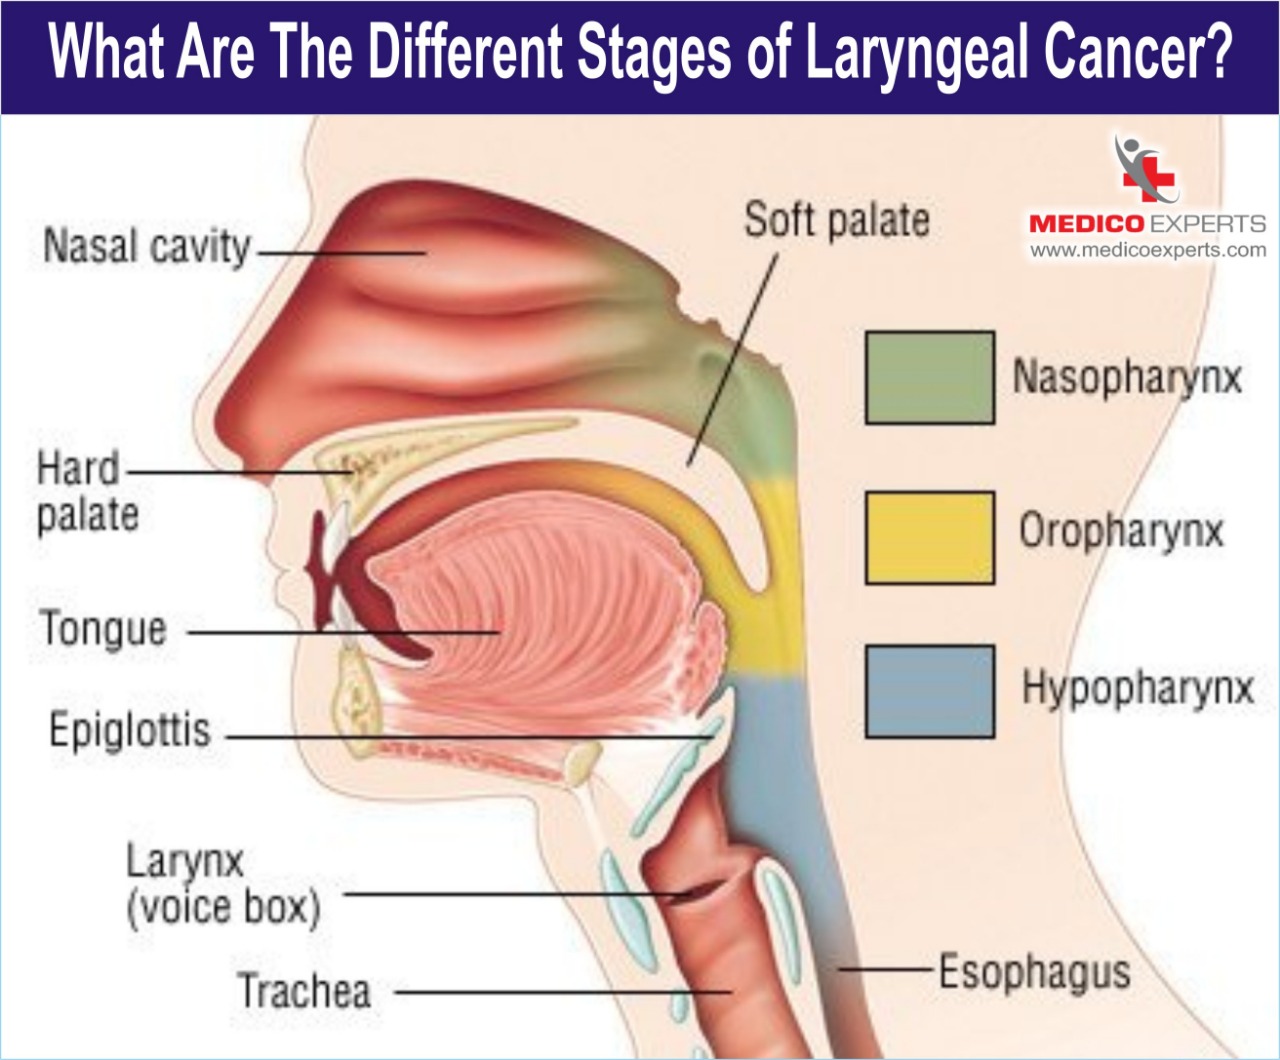 stages of laryngeal cancer, laryngeal cancer treatment